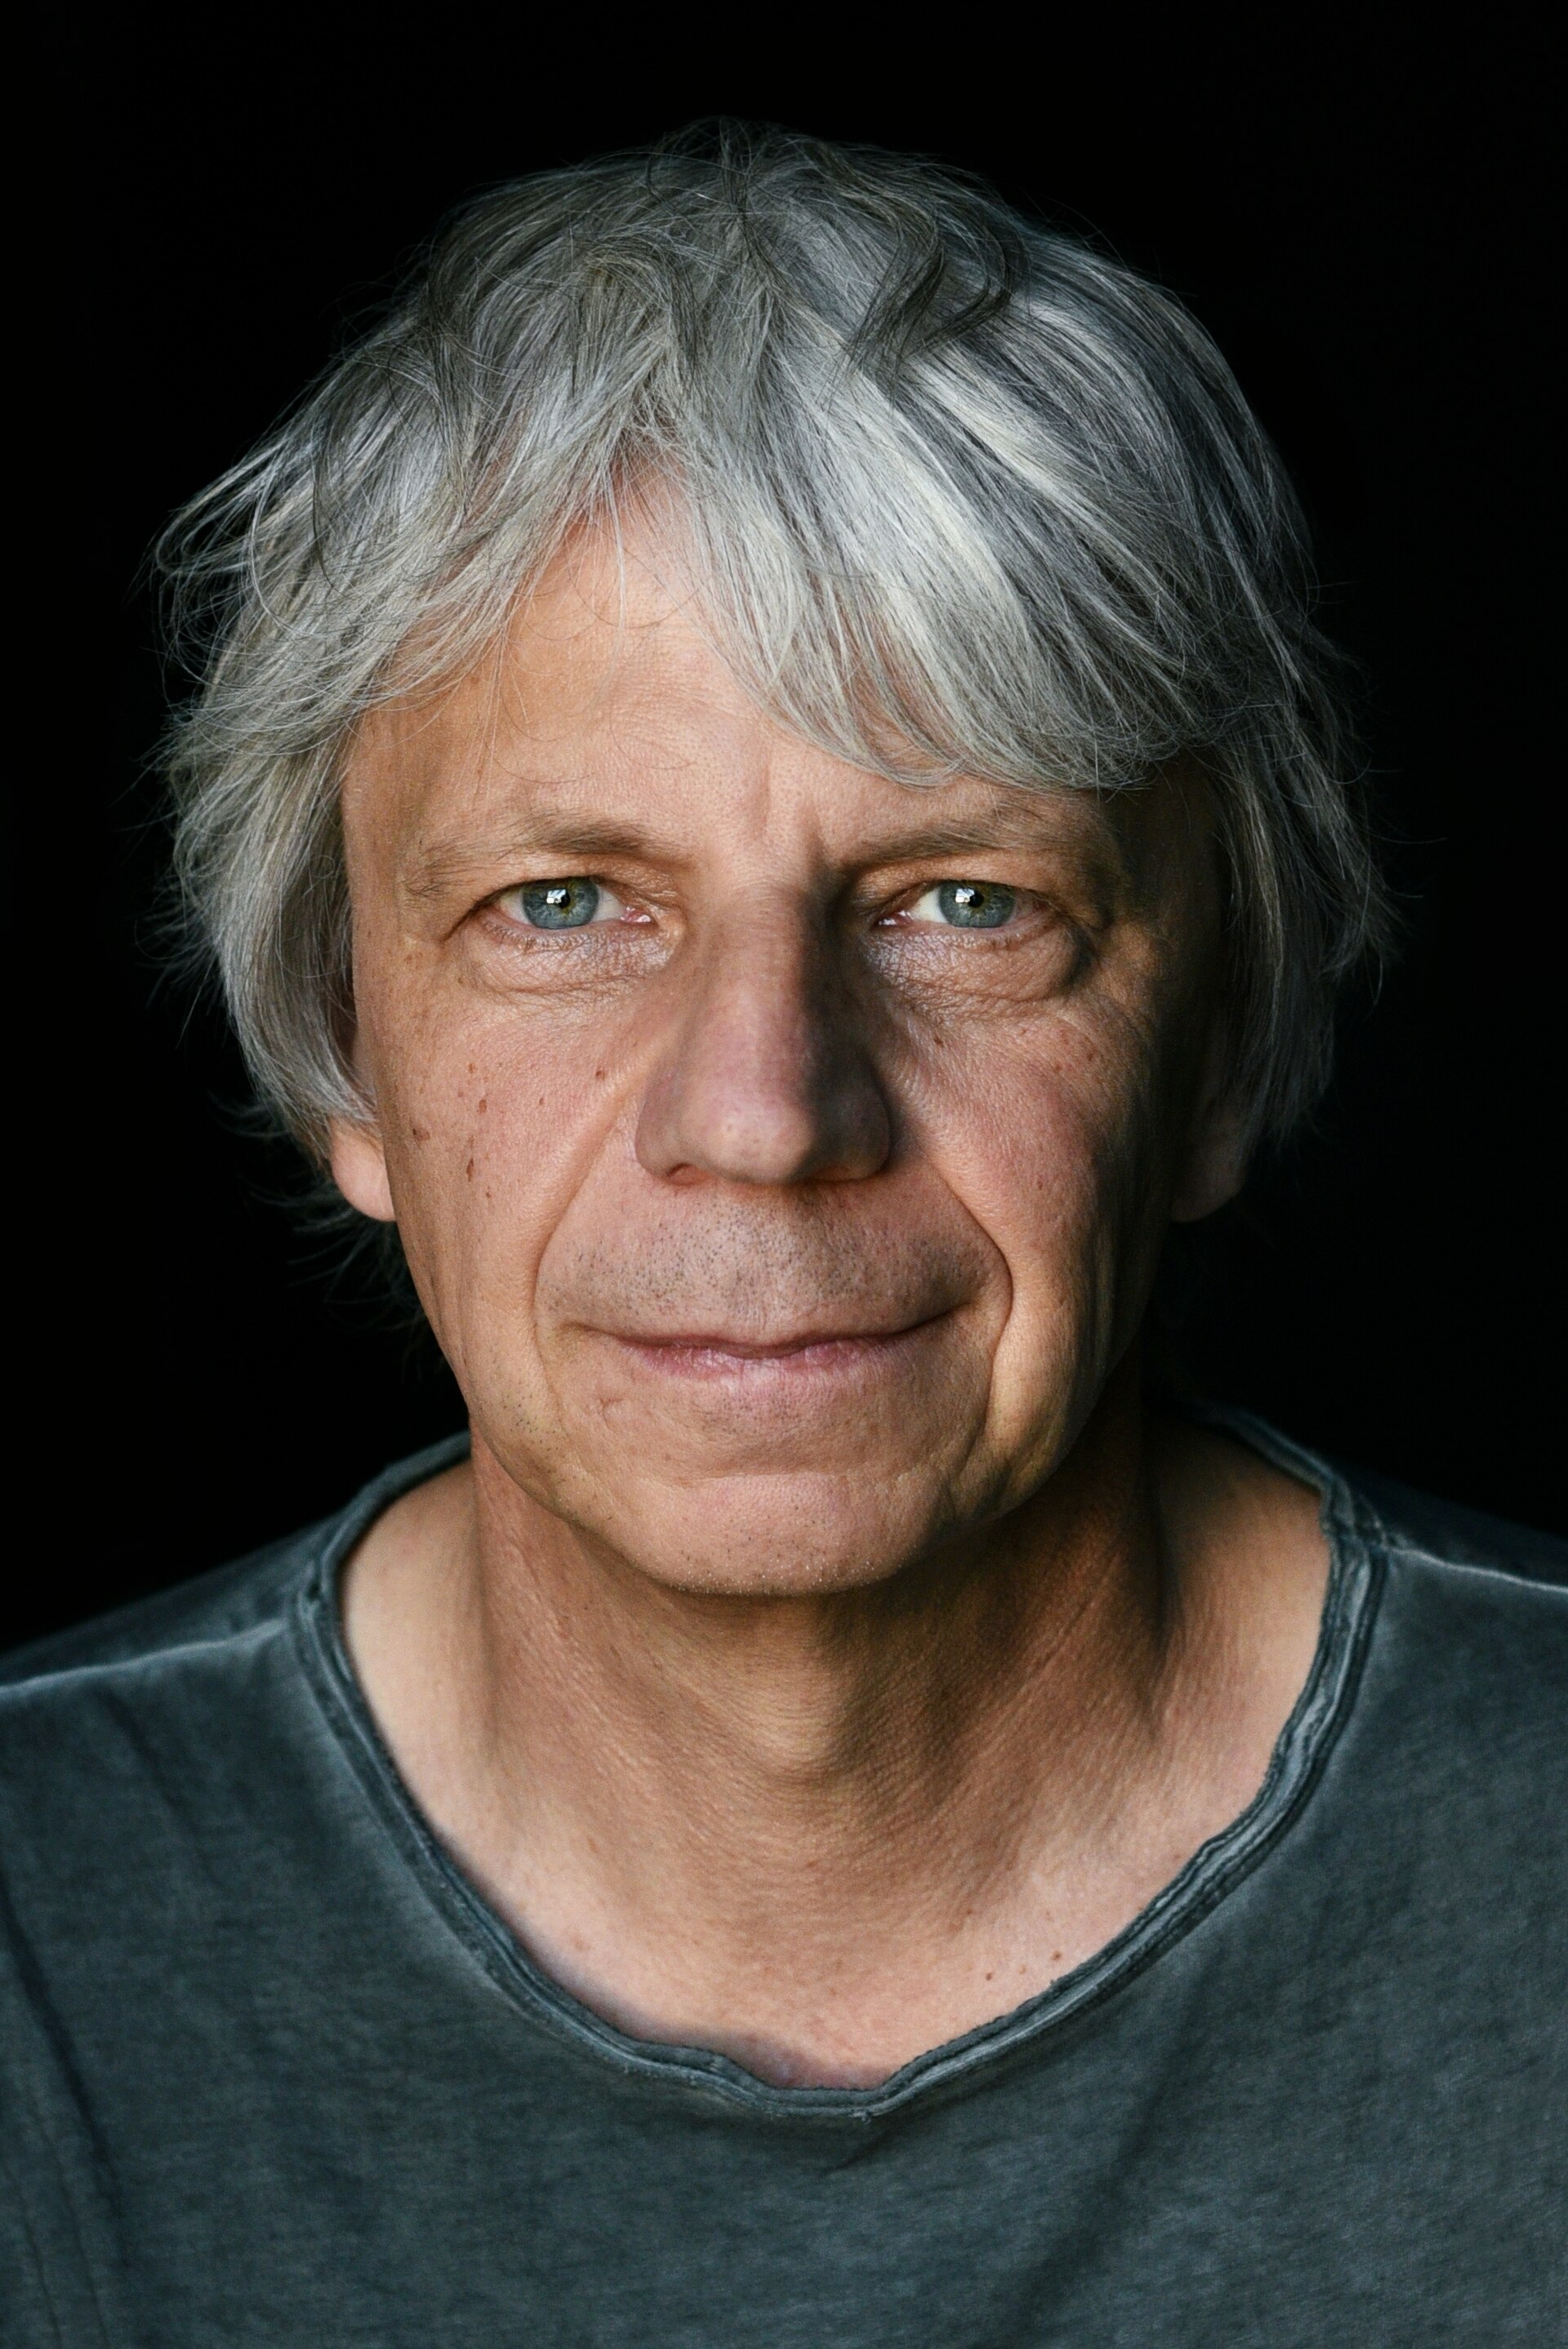 A portrait of 60-year-old German filmmaker Andreas Dresen, who has grey hair and blue eyes.